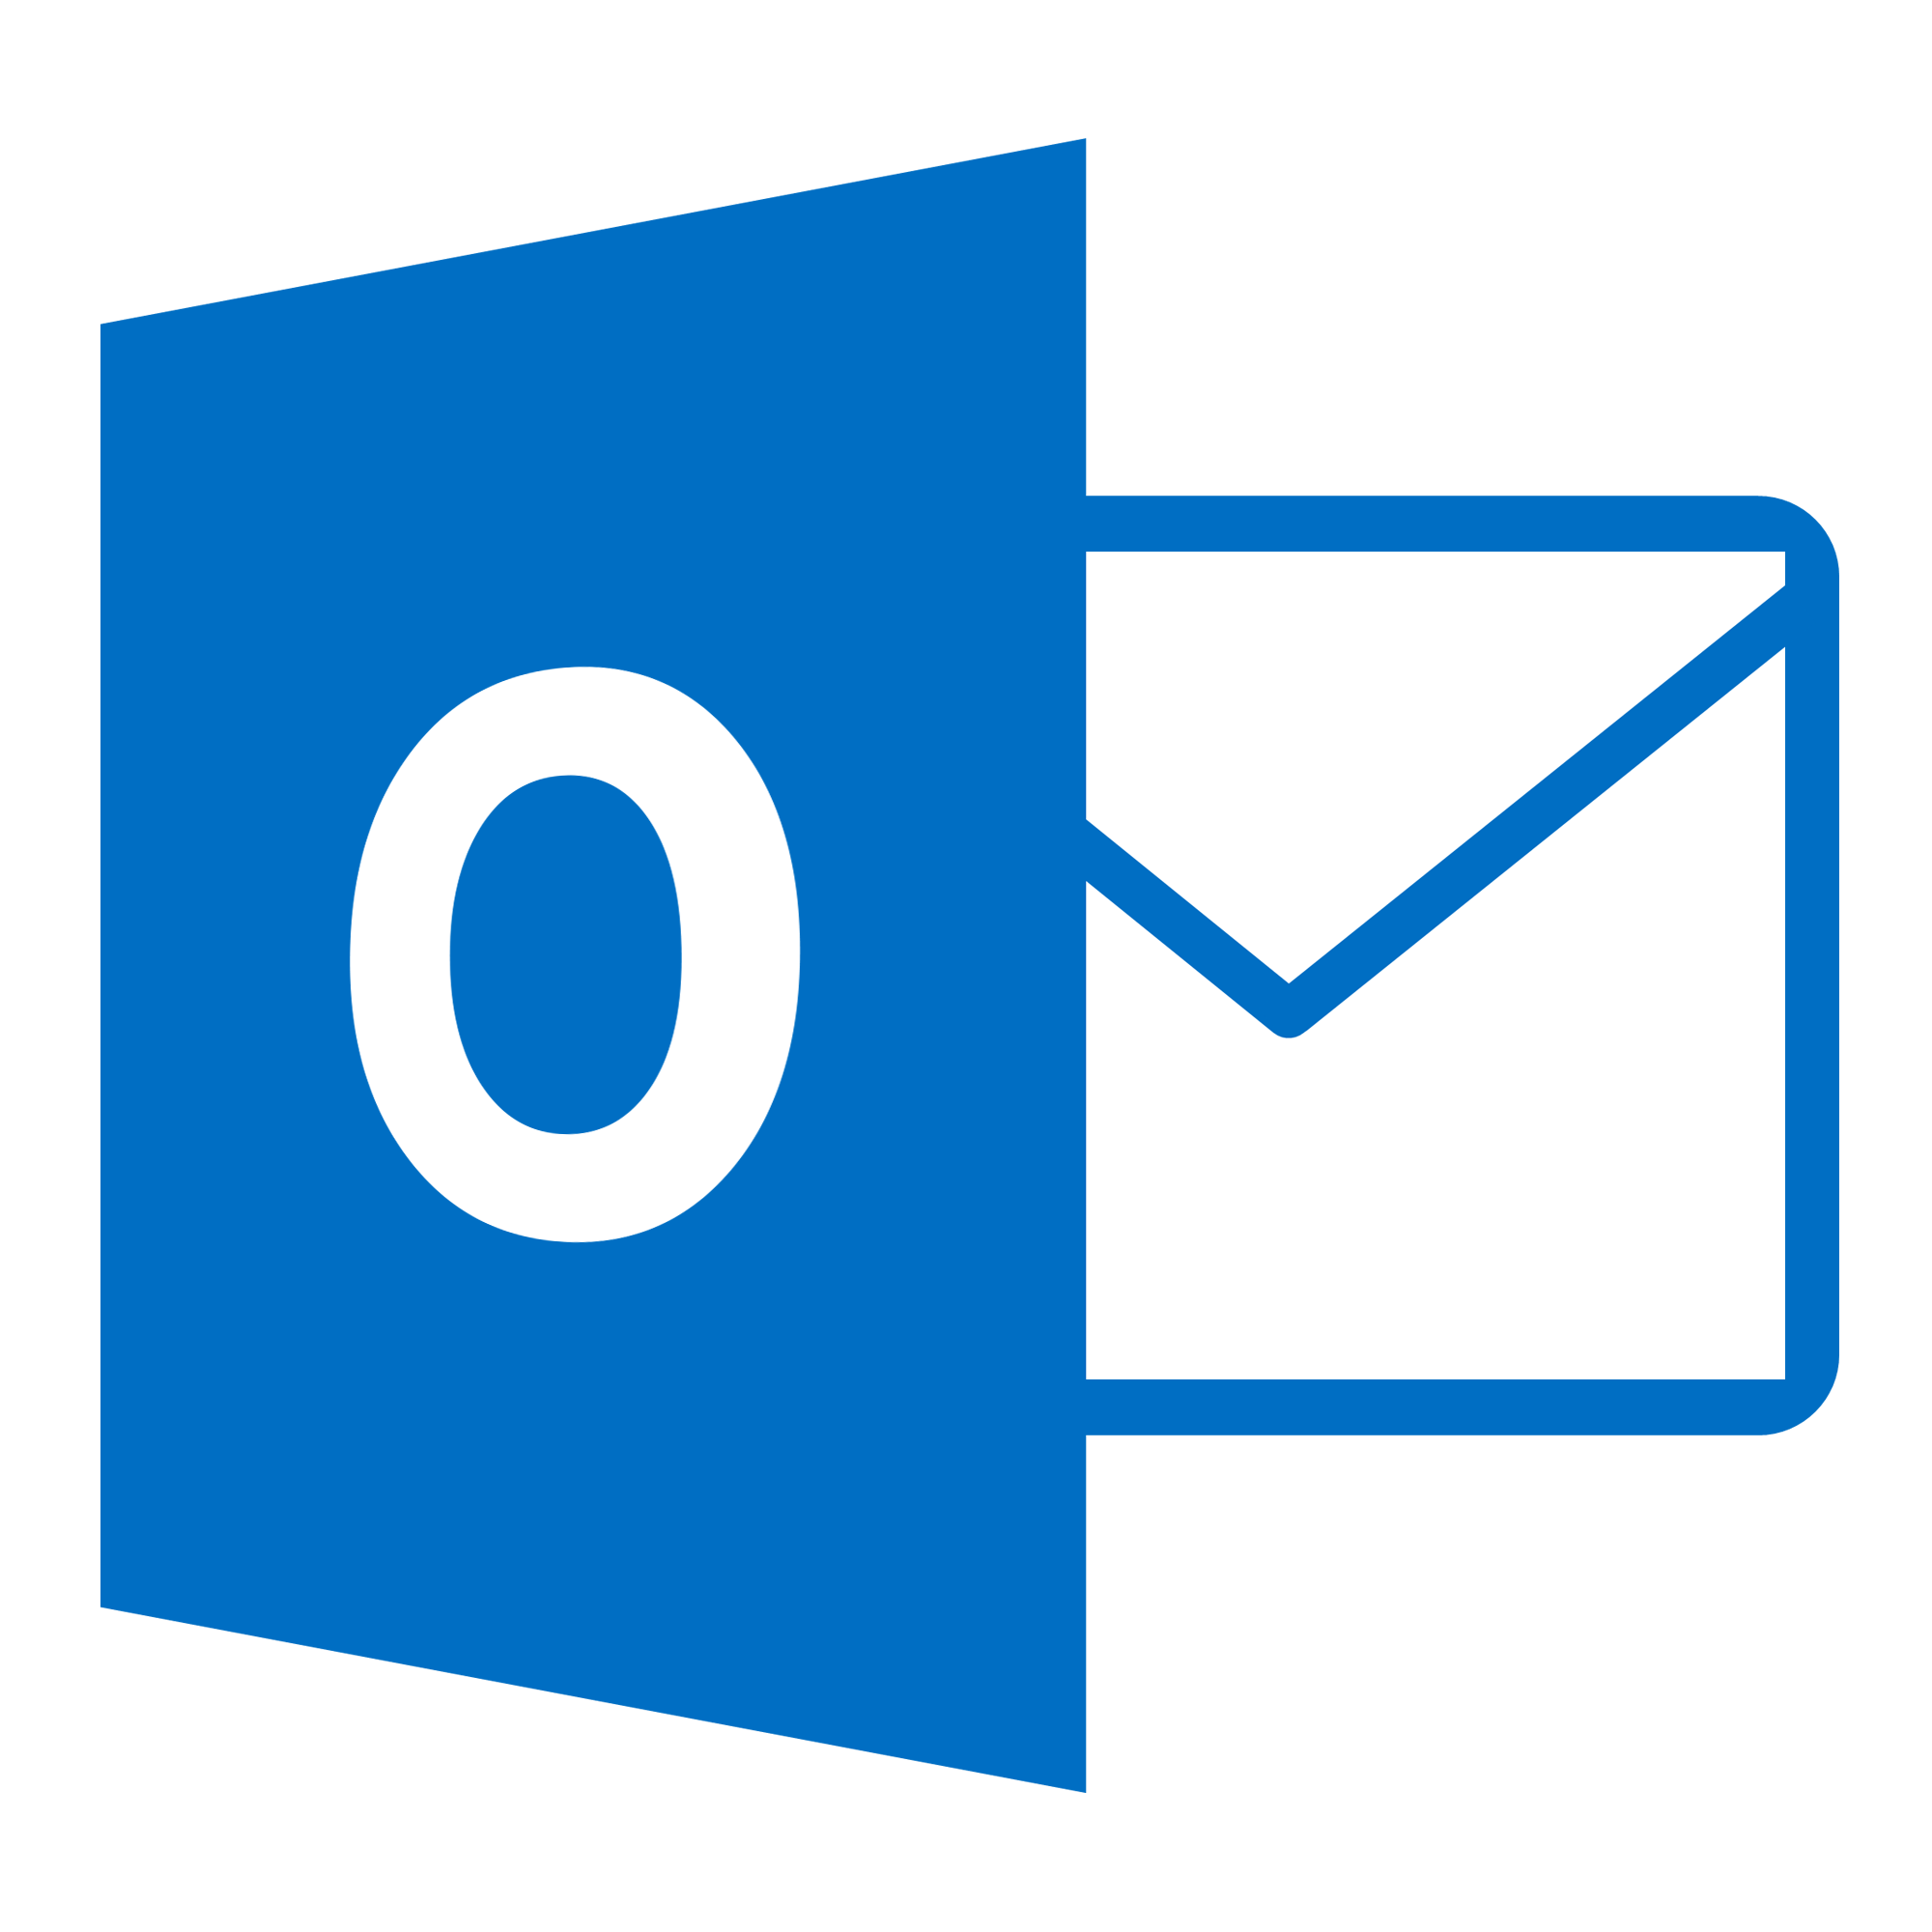 outlook solution